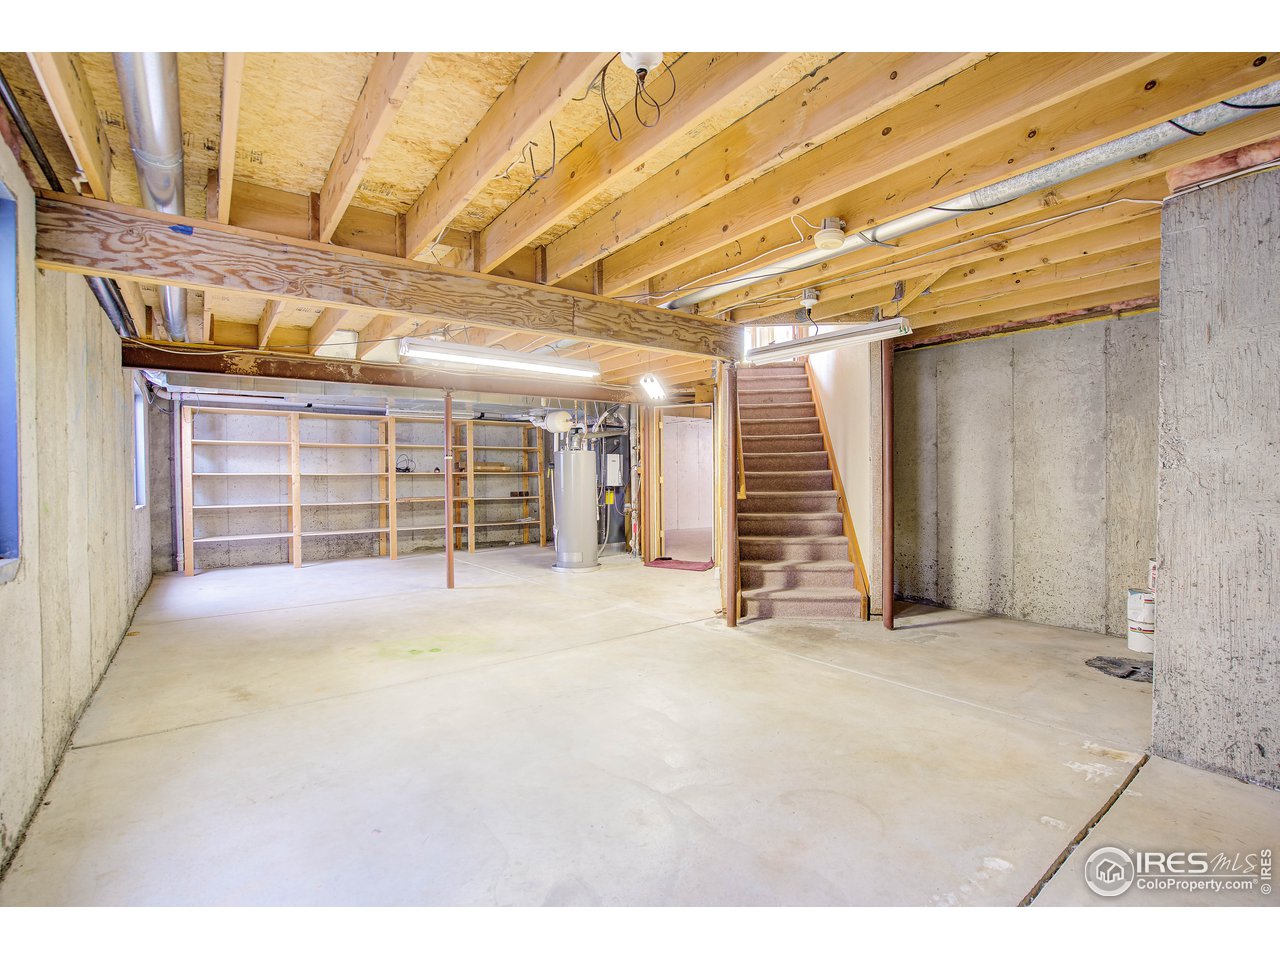 But that is not all; 1,080 sqft awaits you in the basement with 2 egress windows, bathroom rough-in & ready for your touch. 